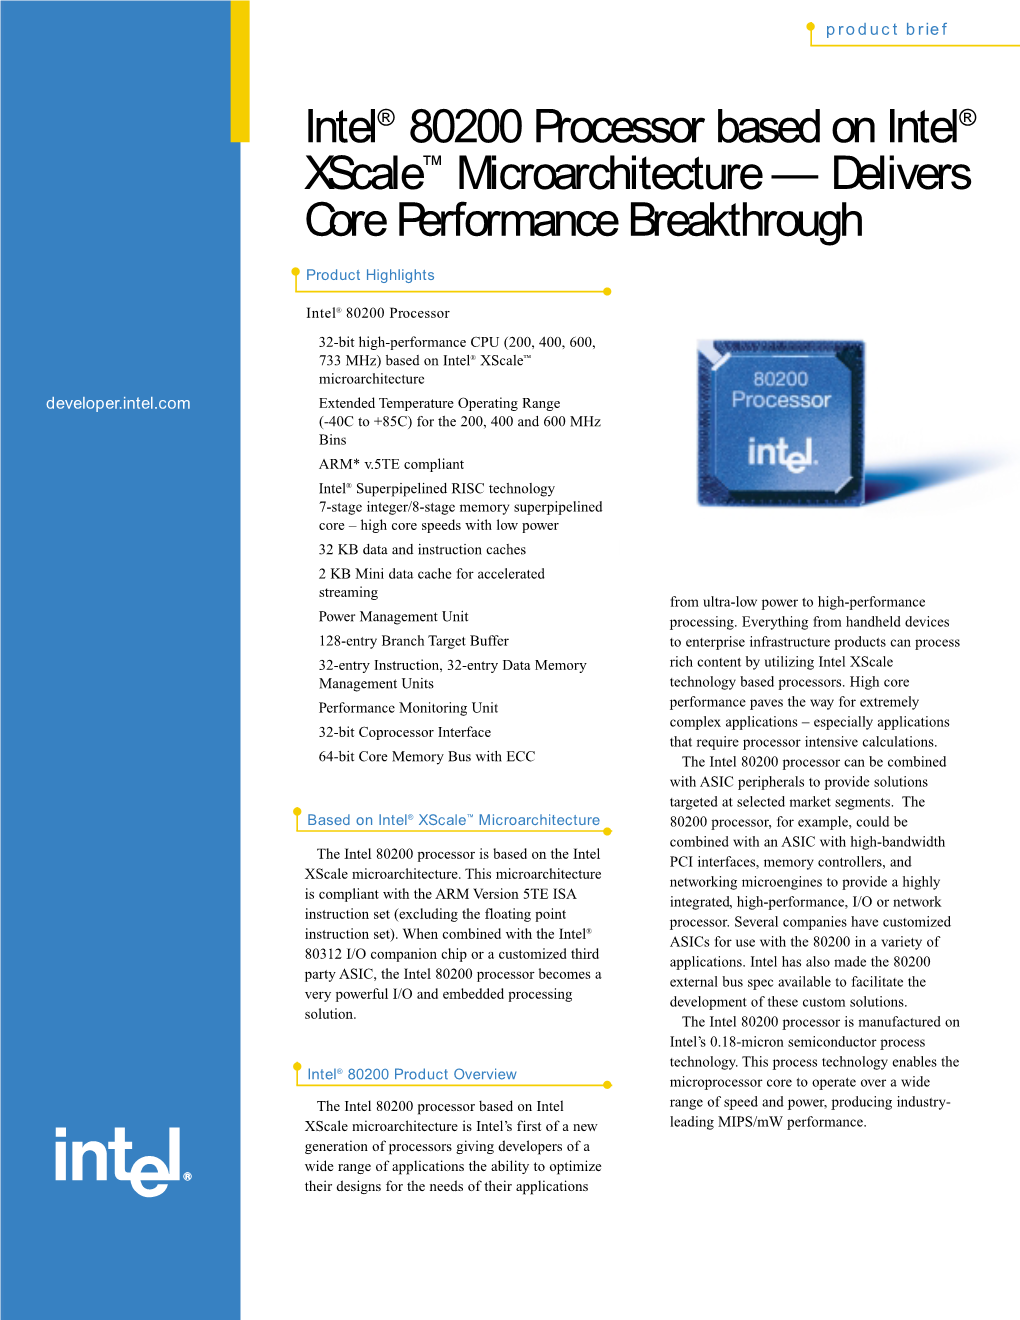 Intel® 80200 Processor Based on Intel® Xscale™ Microarchitecture — Delivers Core Performance Breakthrough